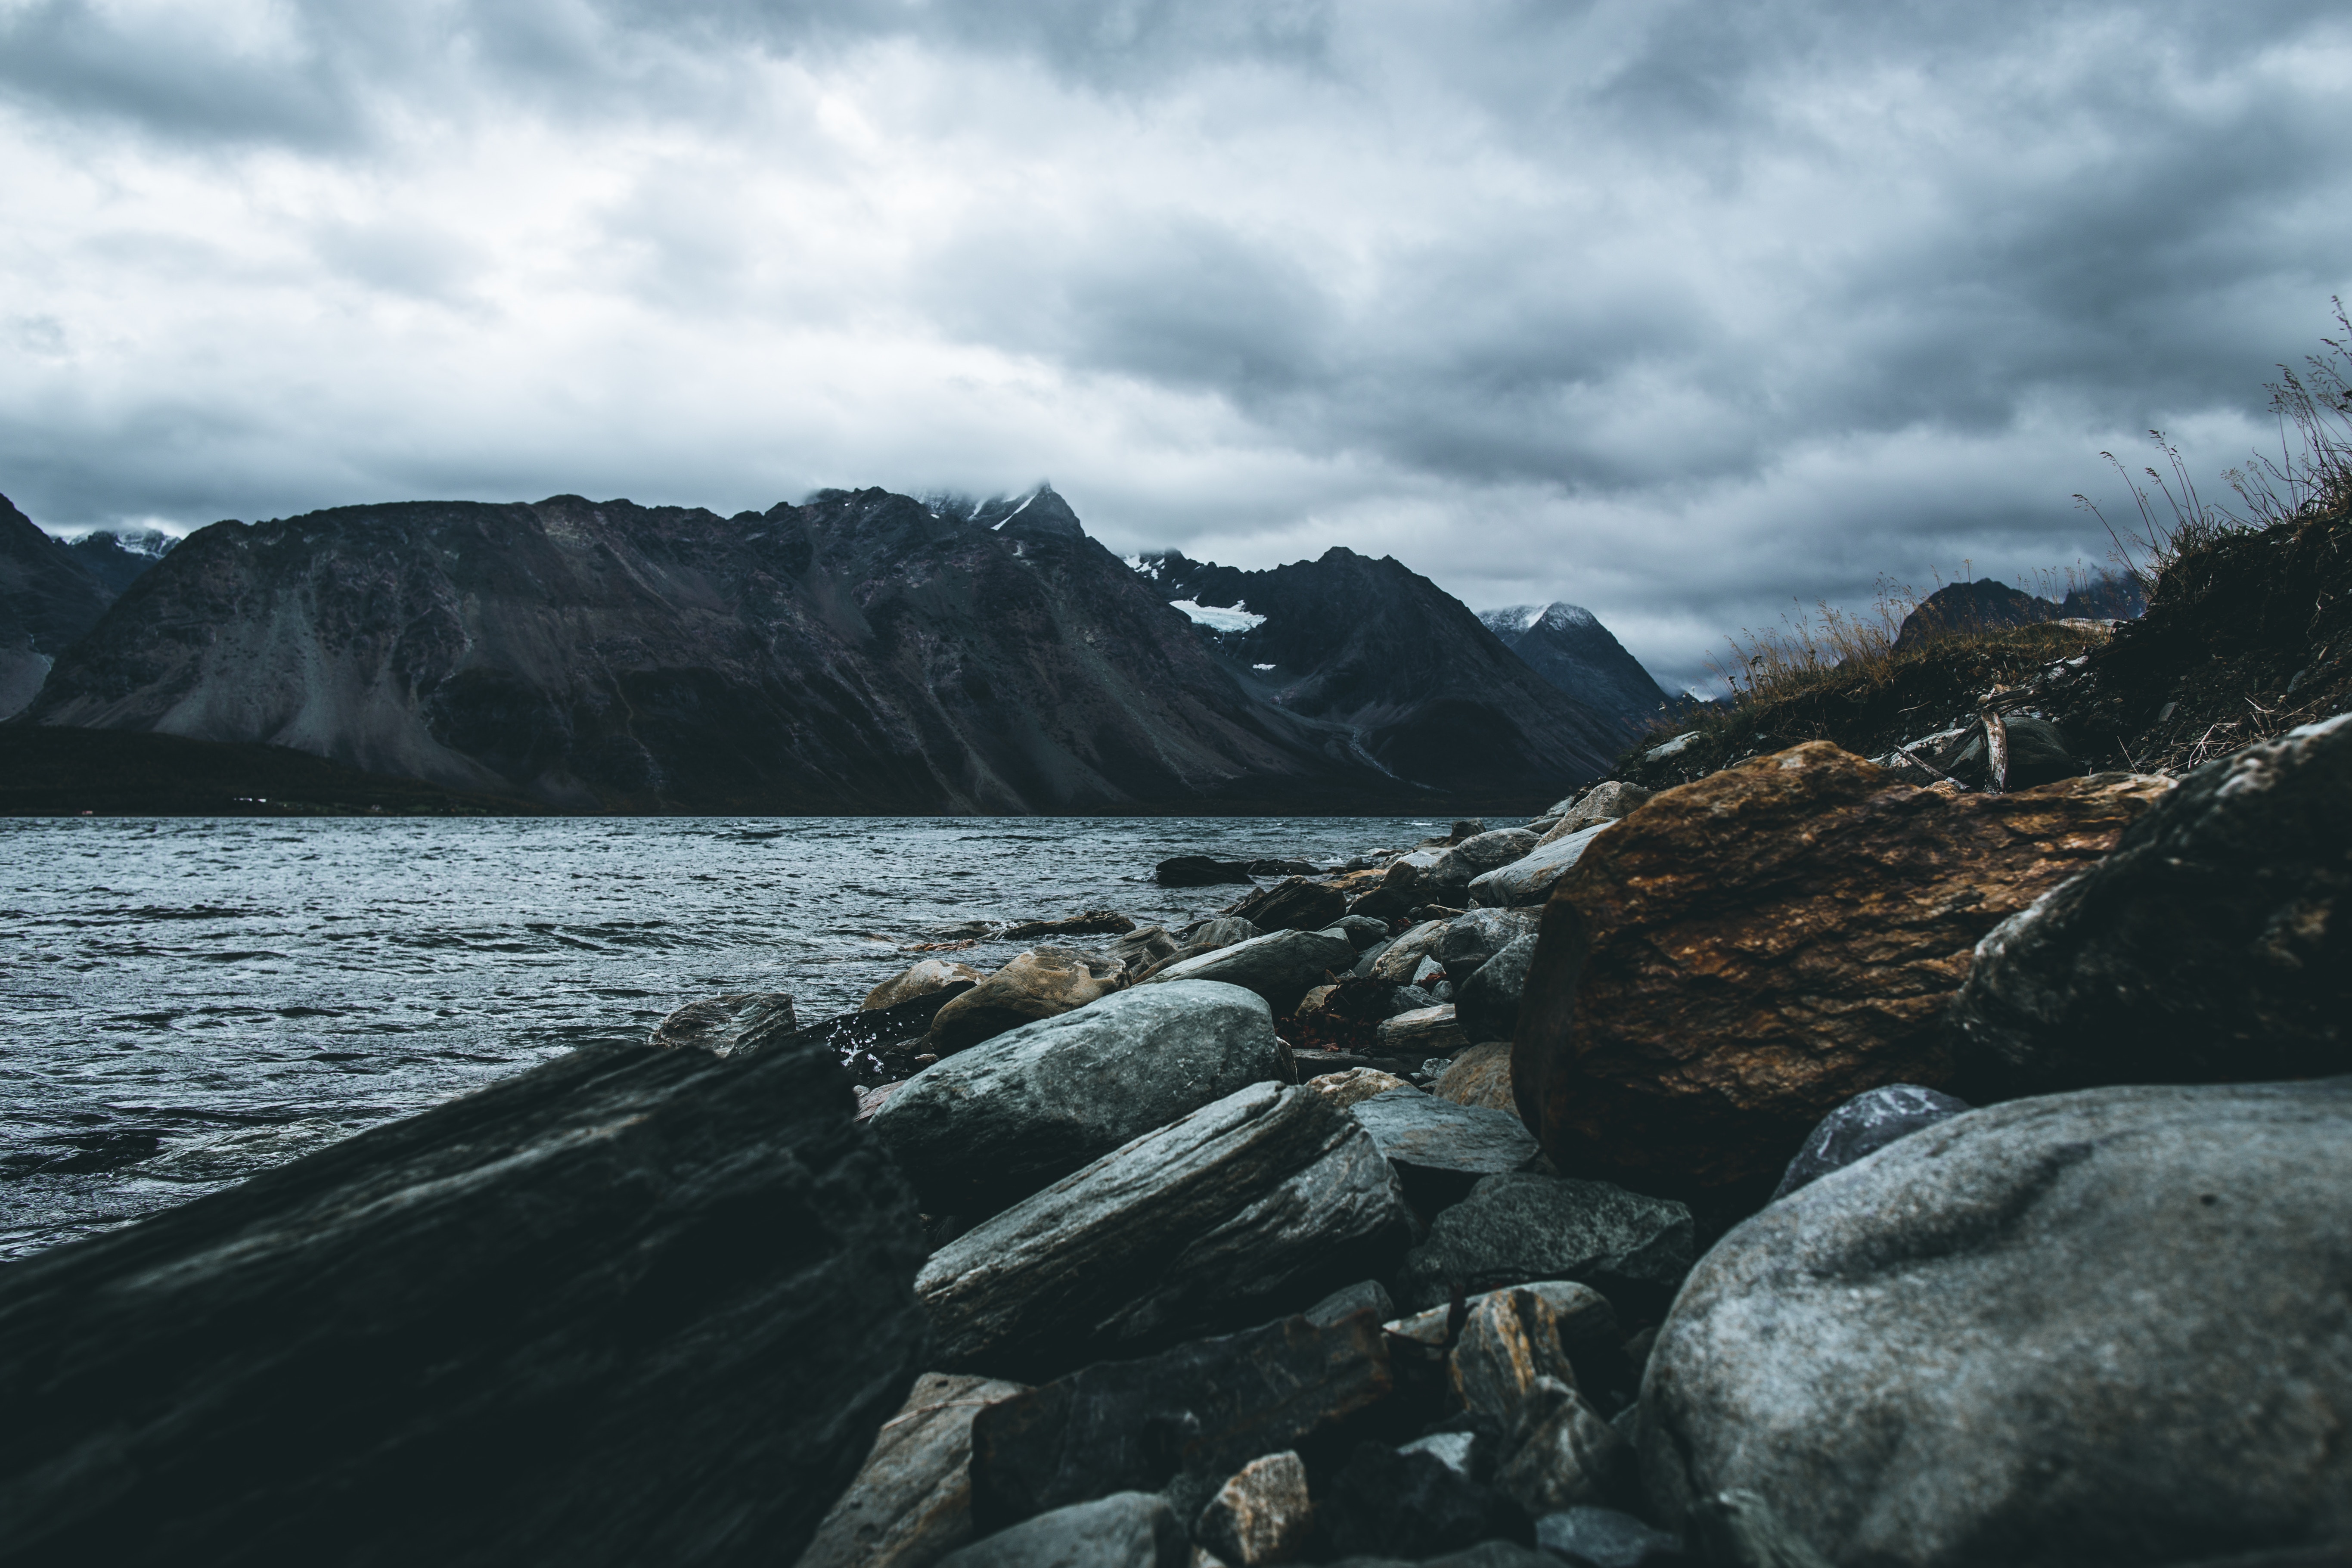 mainly cloudy, nature, water, stones, mountain, lake, fog, overcast